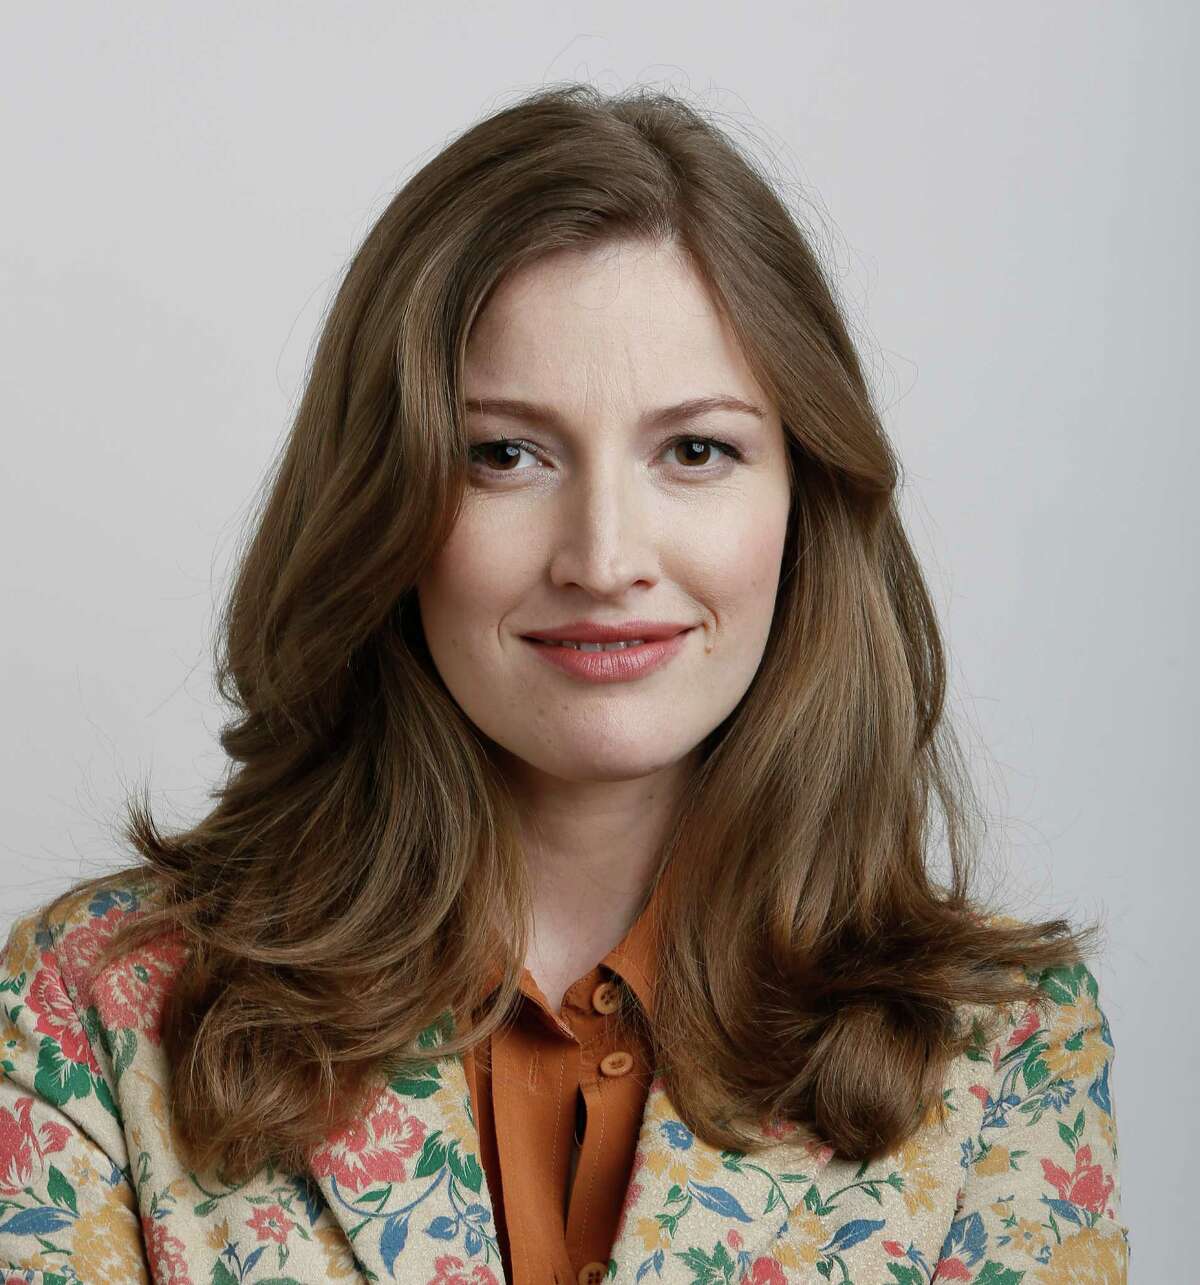 In this Monday, June 18, 2012 photo, actress Kelly Macdonald poses for a portrait during the "Brave" press day at Loews Hollywood Hotel, in Los Angeles.